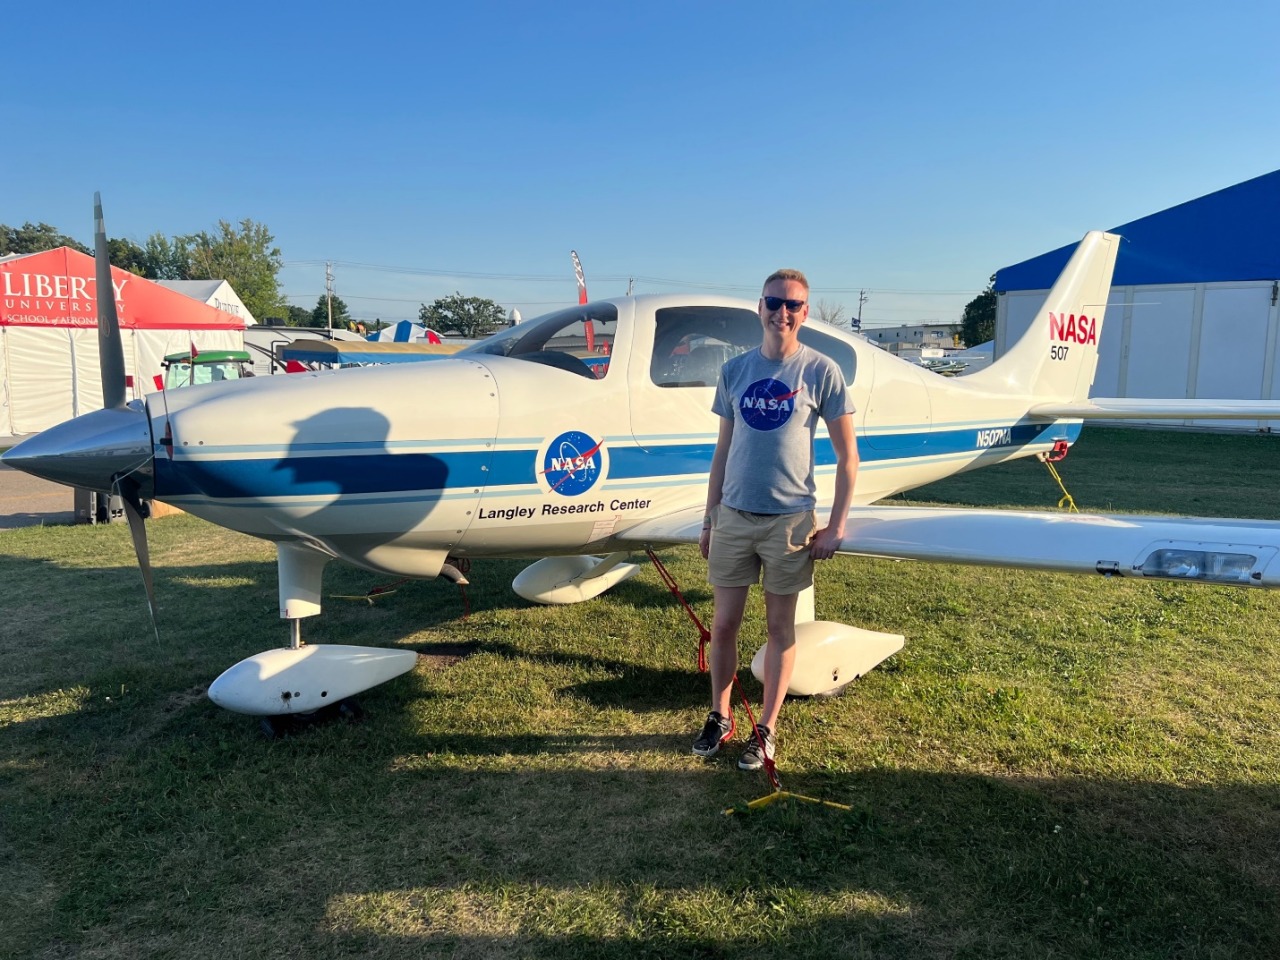 Adult Michael posing in front of a NASA aircraft at EAA Airventure 2022 in Oshkosh, WI. An adult man wearing a NASA t-shirt stands in front of a white and blue emblazoned propeller plane on a green patch of grass.